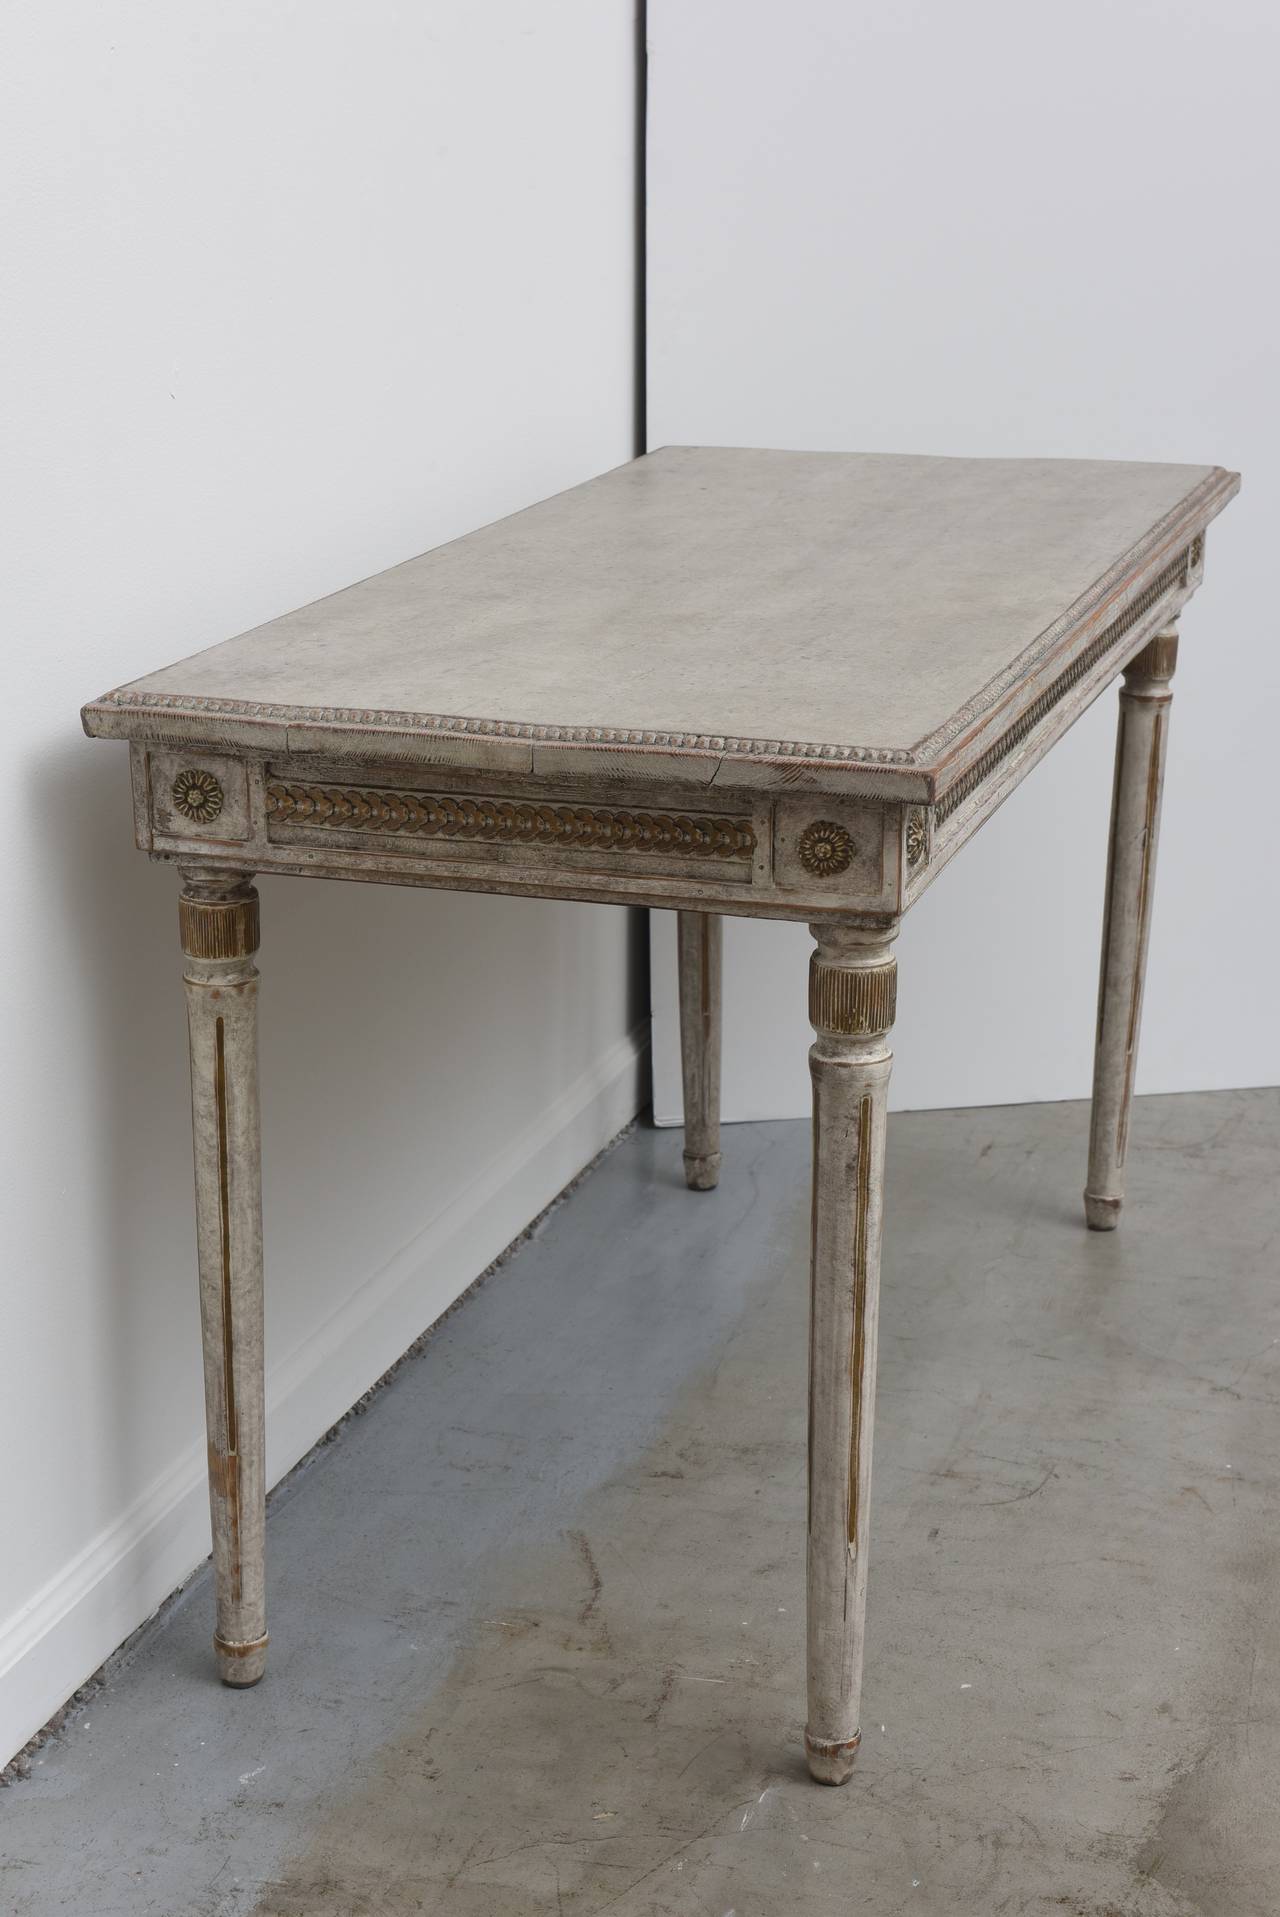 Painted Antique Swedish Console Table, Mid-19th Century. A carved beaded top sets off the apron below, which features a carved chain design with inset carved rosettes at each corner. An exquisitely carved rondel sits near the top of each tapered